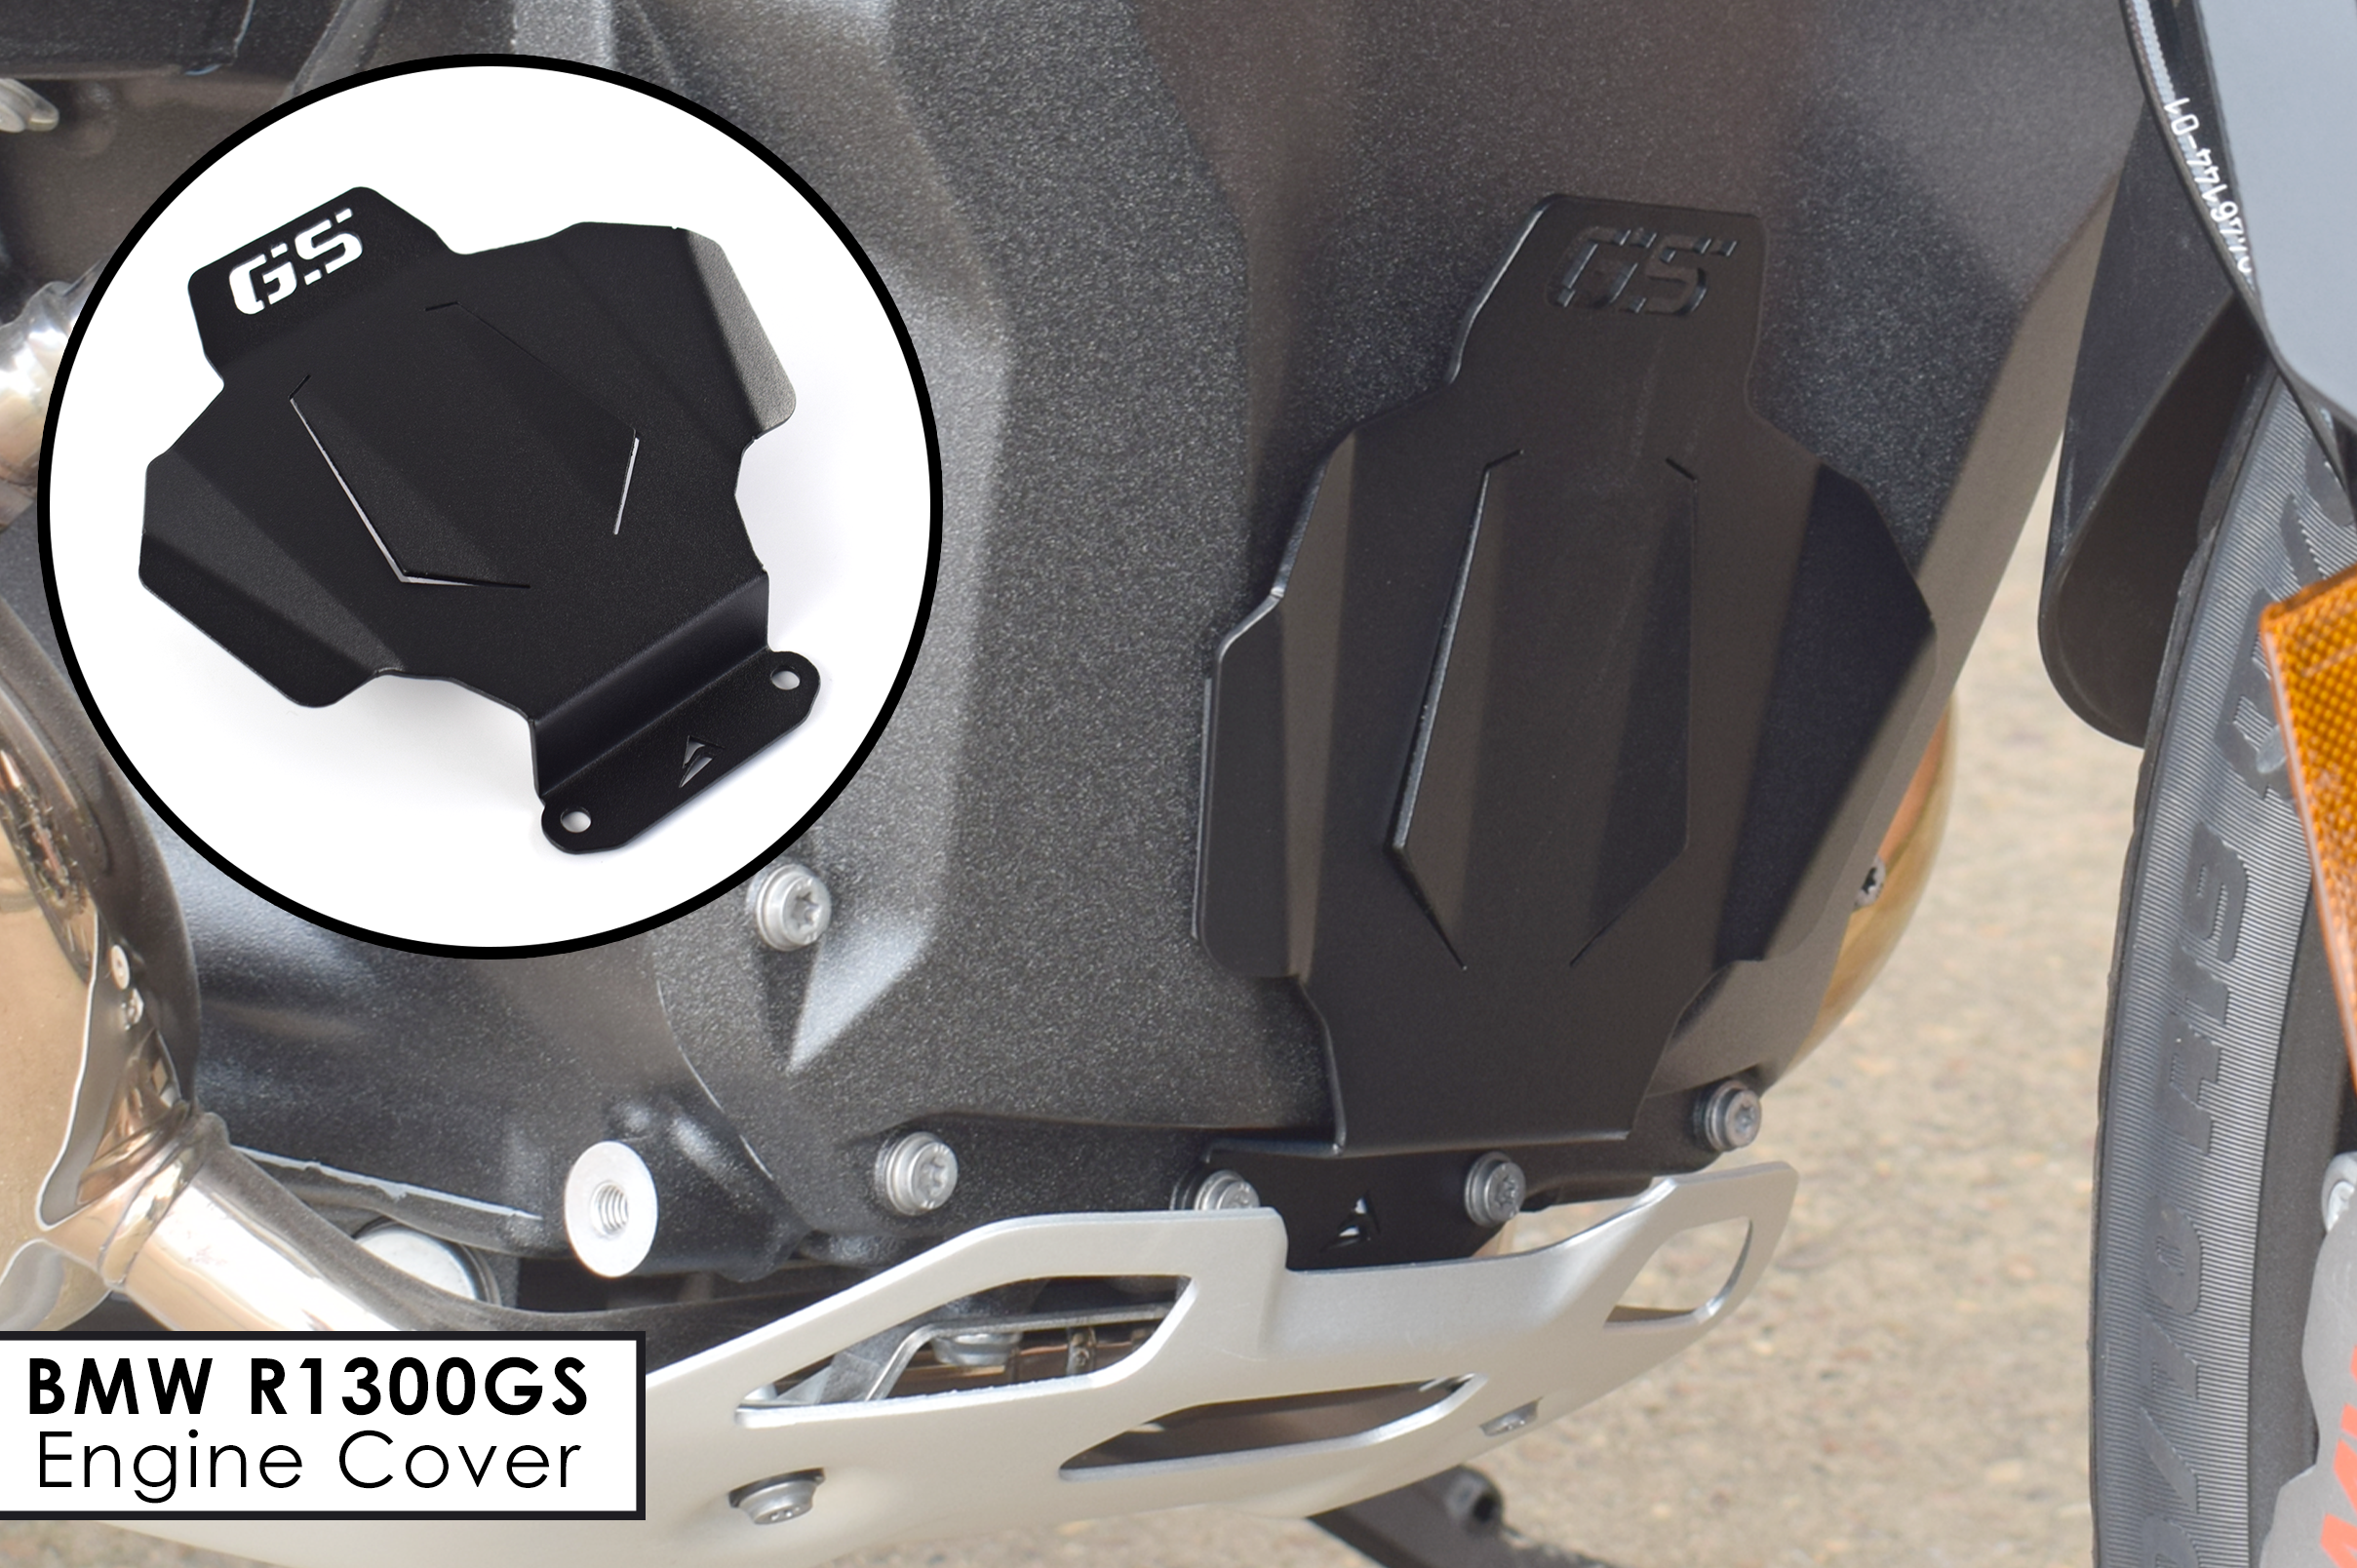 The BMW R1300GS Engine Cover!